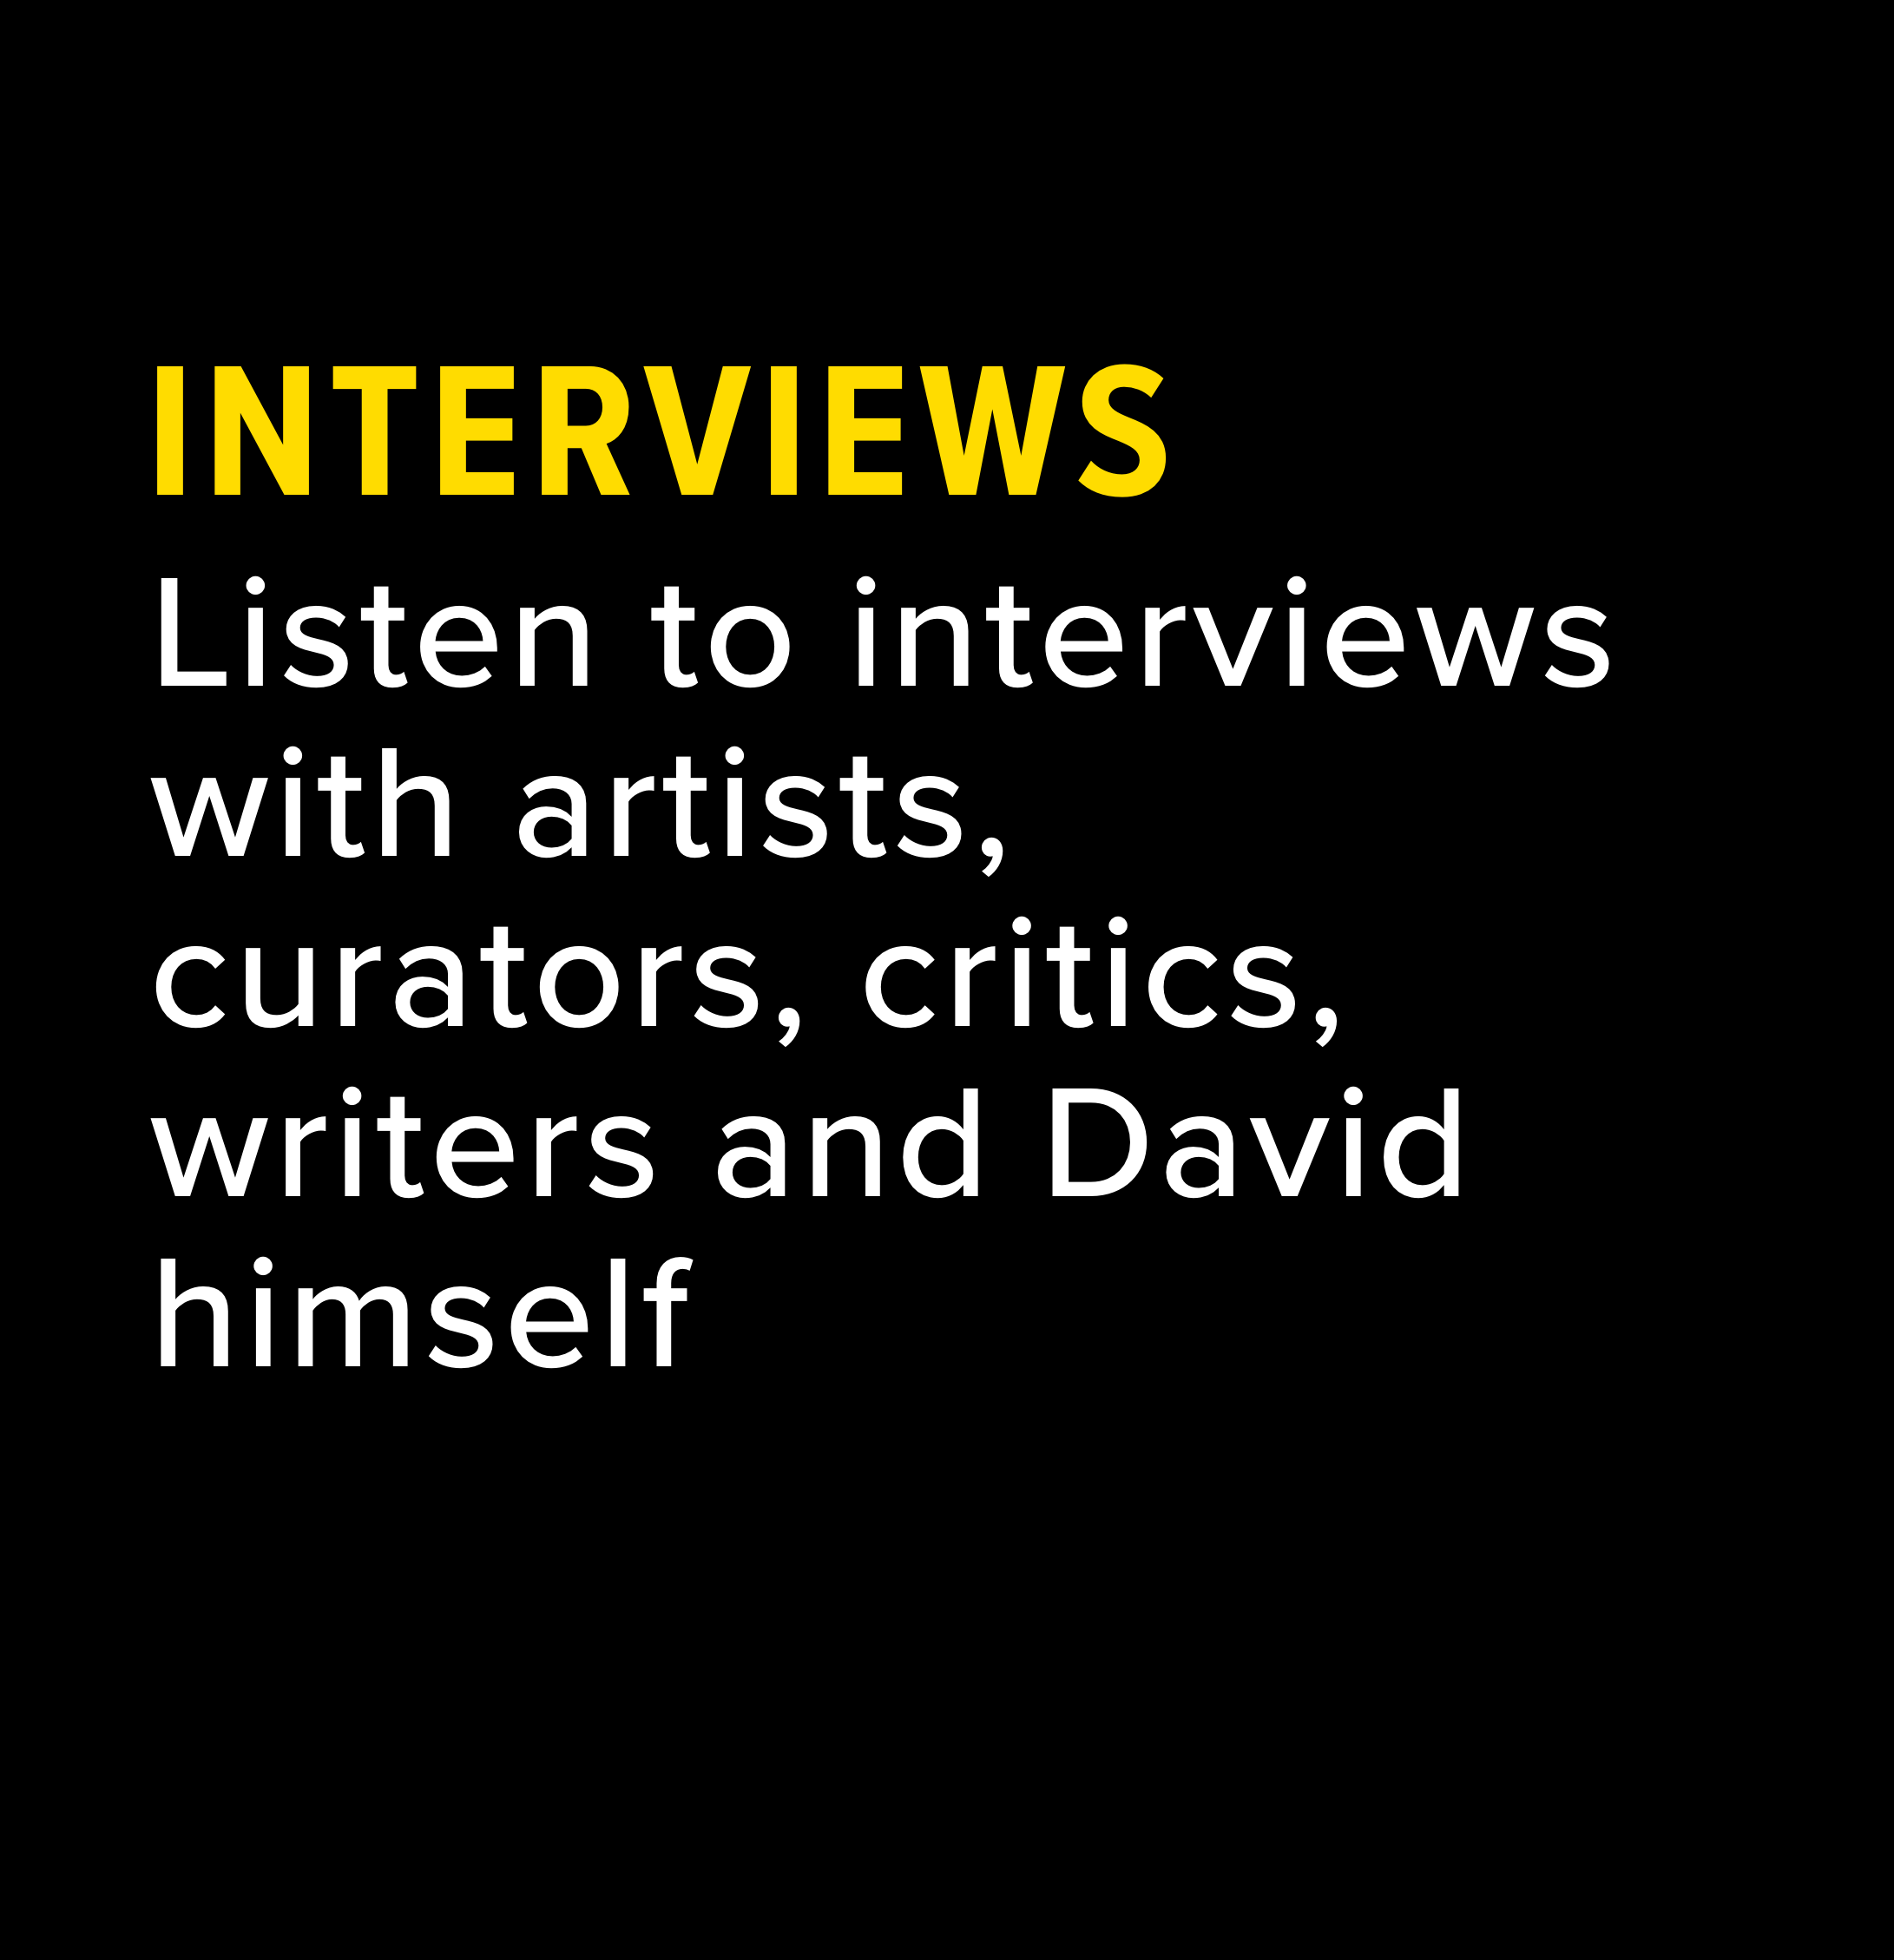 Listen to interviews with artists, curators, critics, writers and David himself